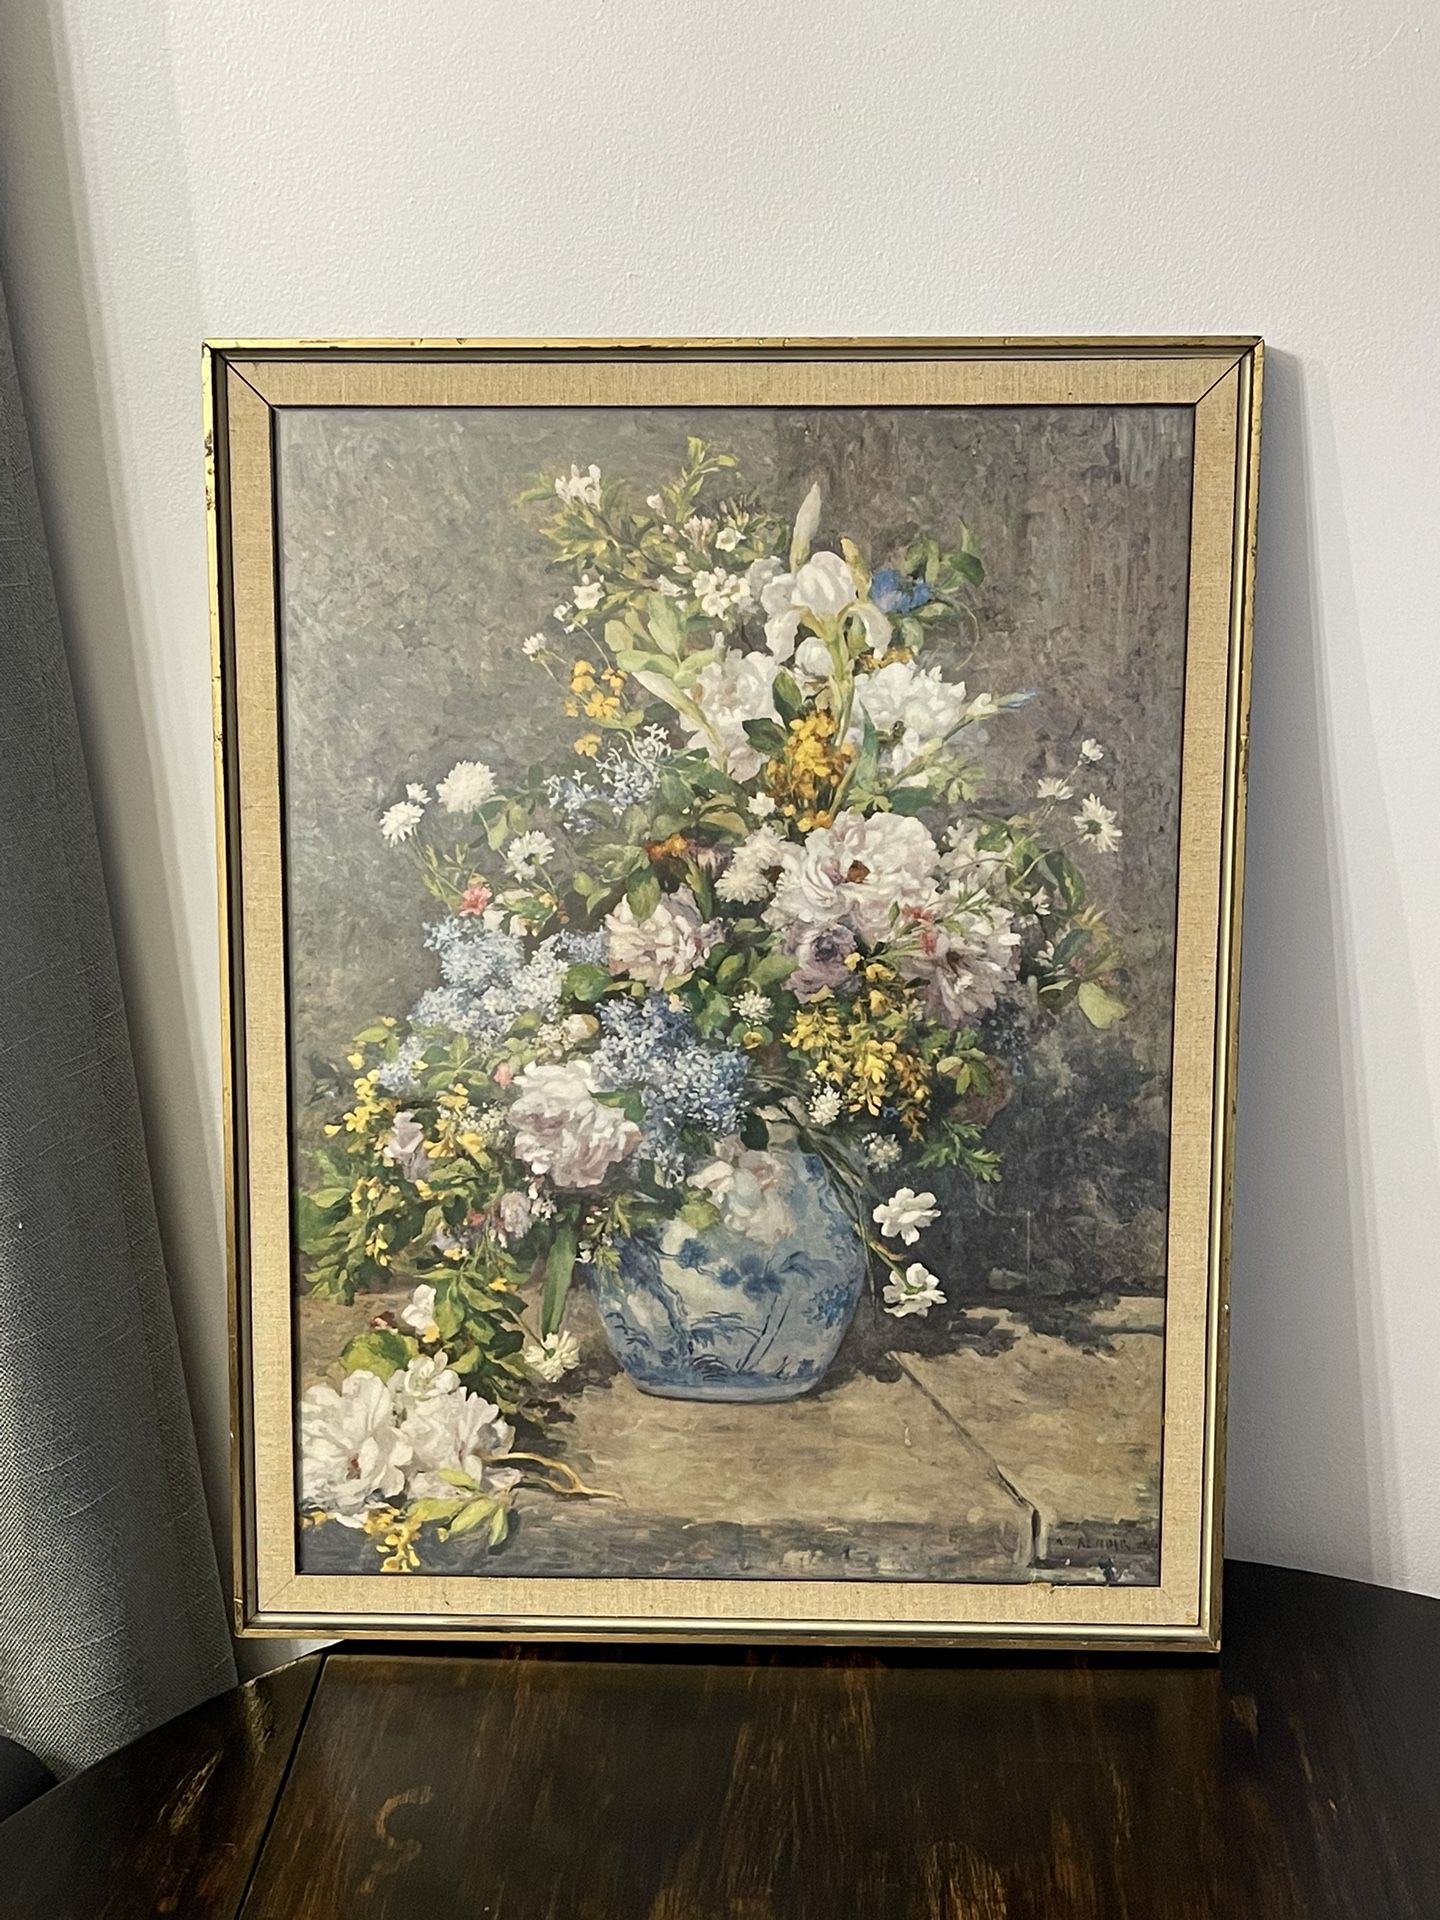 SPRING BOUQUET FLOWERS IN A VASE 1866 FRENCH ANTIQUE PRINT BY A. RENOIR